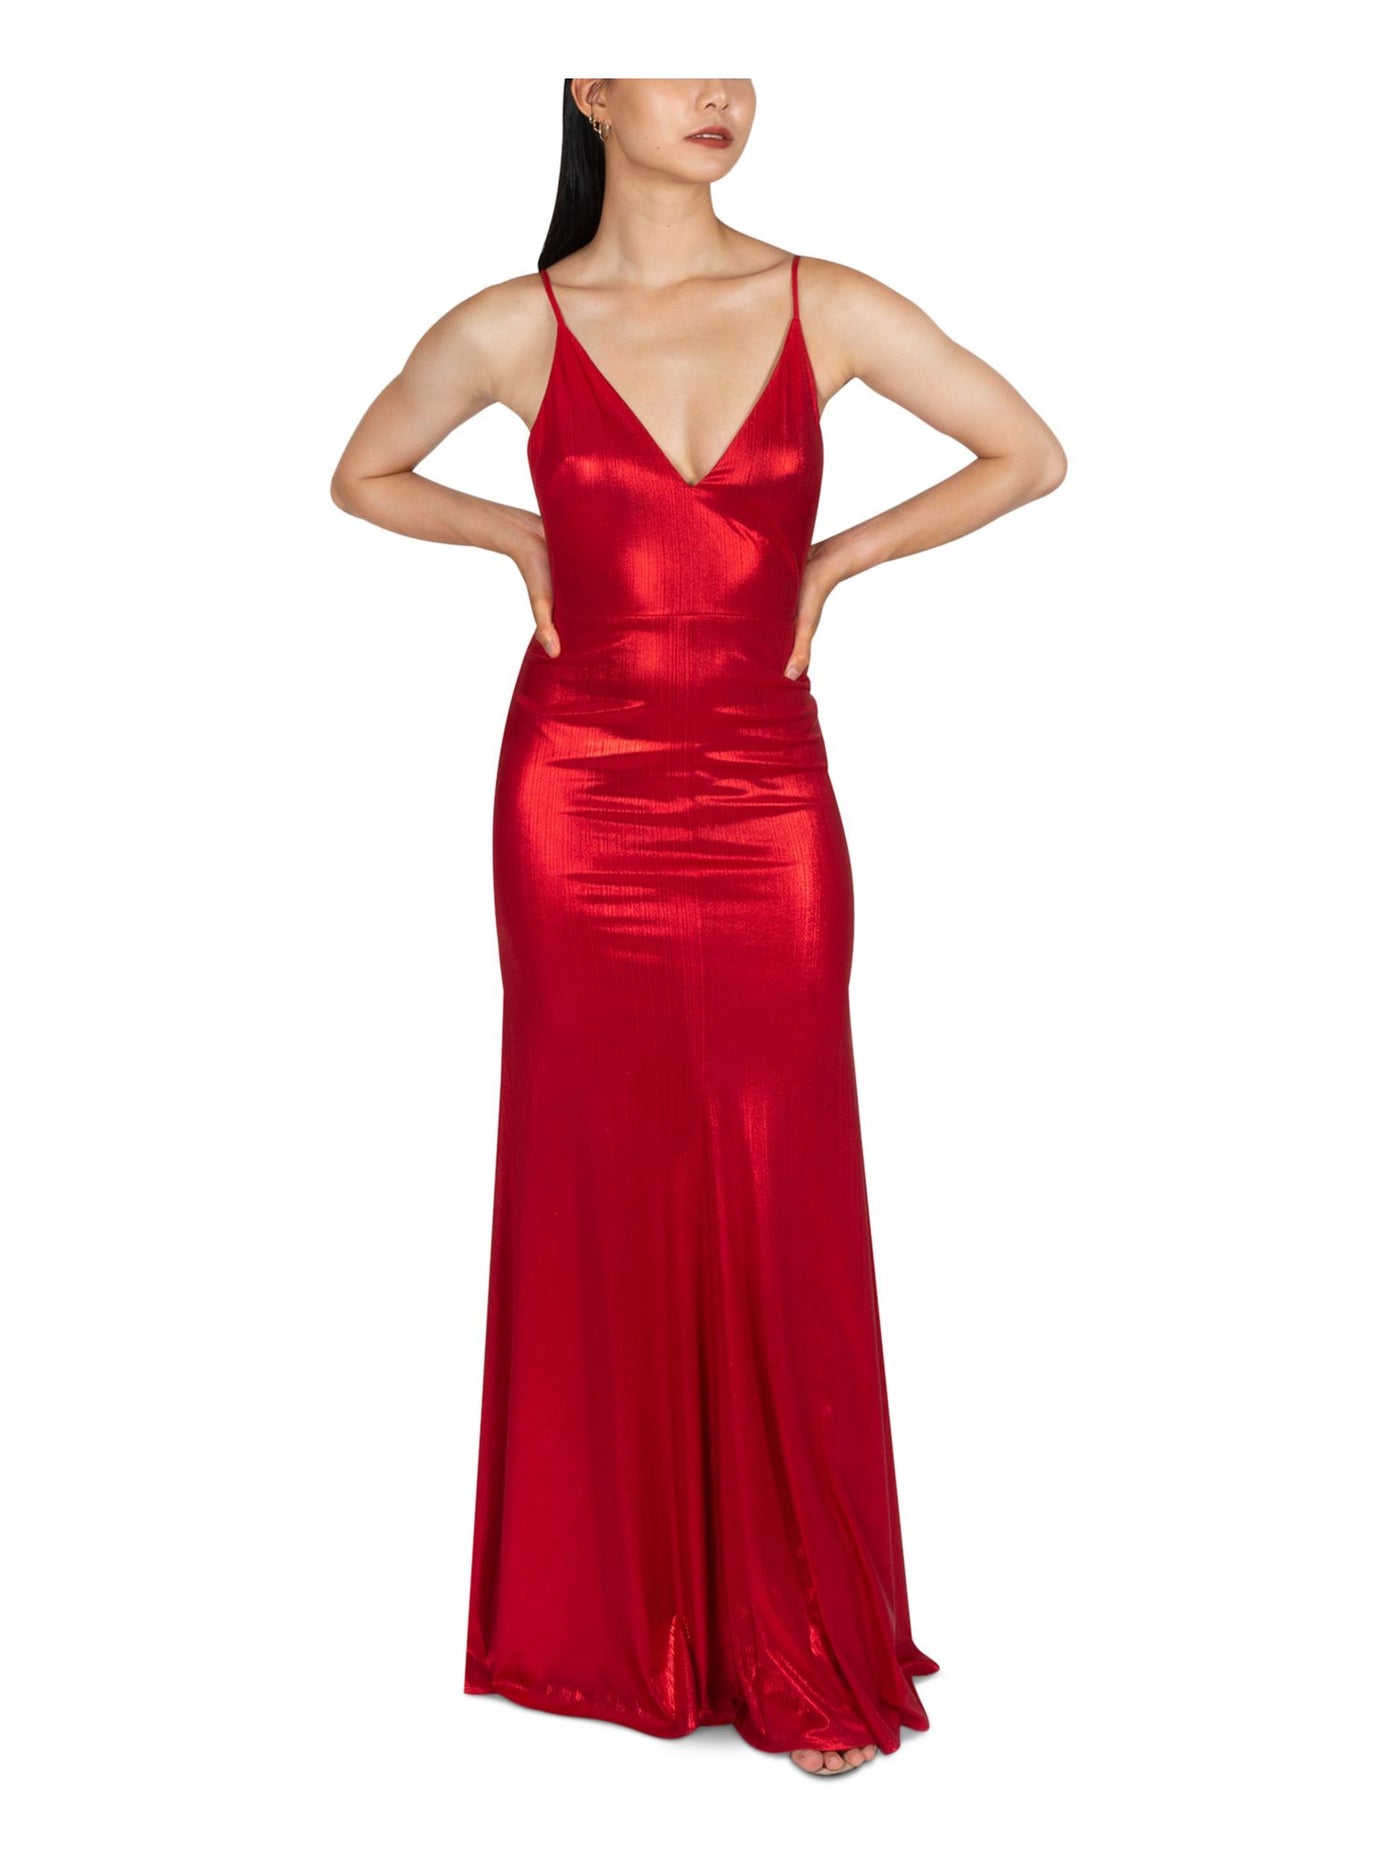 DEAR MOON Womens Red Stretch Zippered Low Back Adjustable Straps Lined Spaghetti Strap V Neck Full-Length Prom Gown Dress Juniors 9